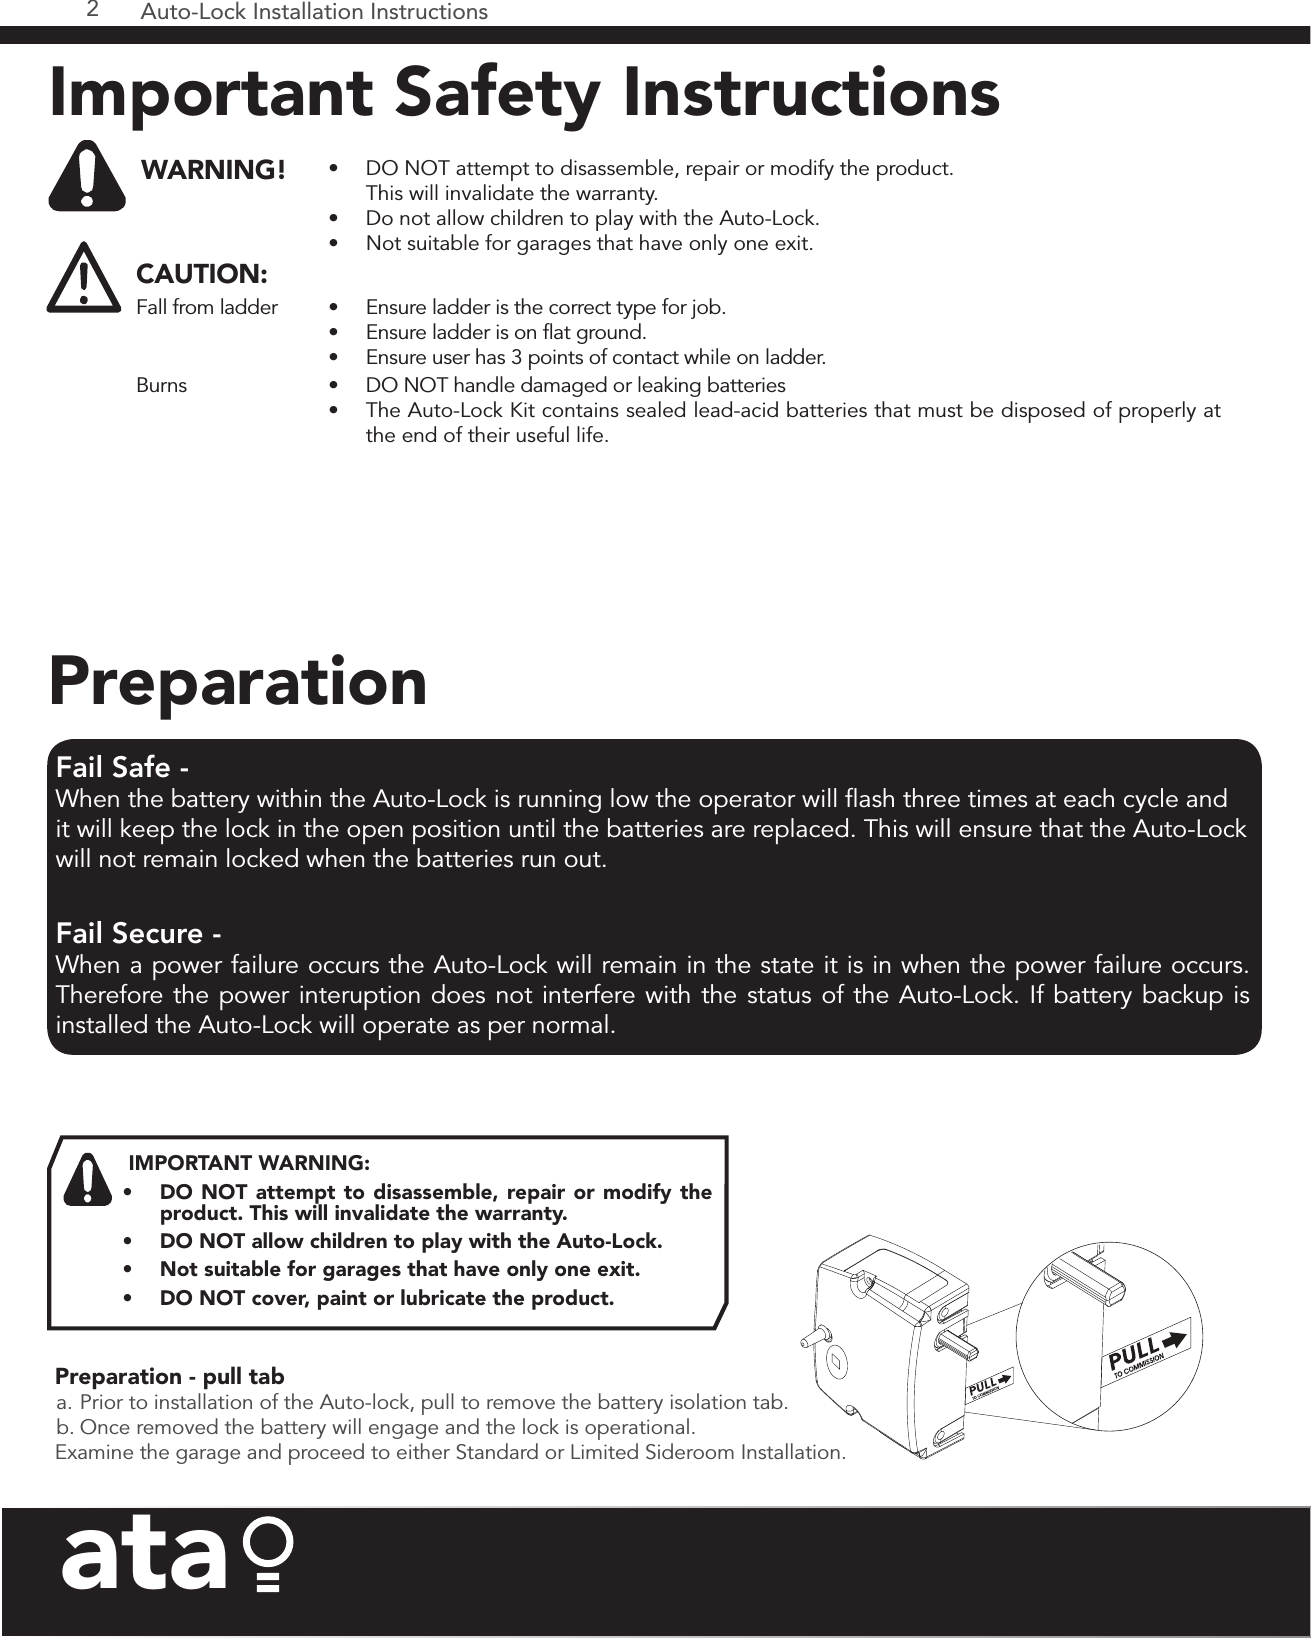 Auto-Lock Installation Instructions2ataPreparation - pull tab a. Prior to installation of the Auto-lock, pull to remove the battery isolation tab.b. Once removed the battery will engage and the lock is operational.Examine the garage and proceed to either Standard or Limited Sideroom Installation.IMPORTANT WARNING: •  DO NOT attempt to disassemble, repair or modify the product. This will invalidate the warranty.  •  DO NOT allow children to play with the Auto-Lock.•  Not suitable for garages that have only one exit.•  DO NOT cover, paint or lubricate the product. Fail Safe - When the battery within the Auto-Lock is running low the operator will flash three times at each cycle and it will keep the lock in the open position until the batteries are replaced. This will ensure that the Auto-Lock will not remain locked when the batteries run out. Fail Secure - When a power failure occurs the Auto-Lock will remain in the state it is in when the power failure occurs. Therefore the power interuption does not interfere with the status of the Auto-Lock. If battery backup is installed the Auto-Lock will operate as per normal.PreparationImportant Safety Instructions WARNING! •  DO NOT attempt to disassemble, repair or modify the product.  This will invalidate the warranty.•  Do not allow children to play with the Auto-Lock.•  Not suitable for garages that have only one exit.CAUTION:Fall from ladder •  Ensure ladder is the correct type for job.•  Ensure ladder is on flat ground.•  Ensure user has 3 points of contact while on ladder.Burns •  DO NOT handle damaged or leaking batteries•  The Auto-Lock Kit contains sealed lead-acid batteries that must be disposed of properly at the end of their useful life.